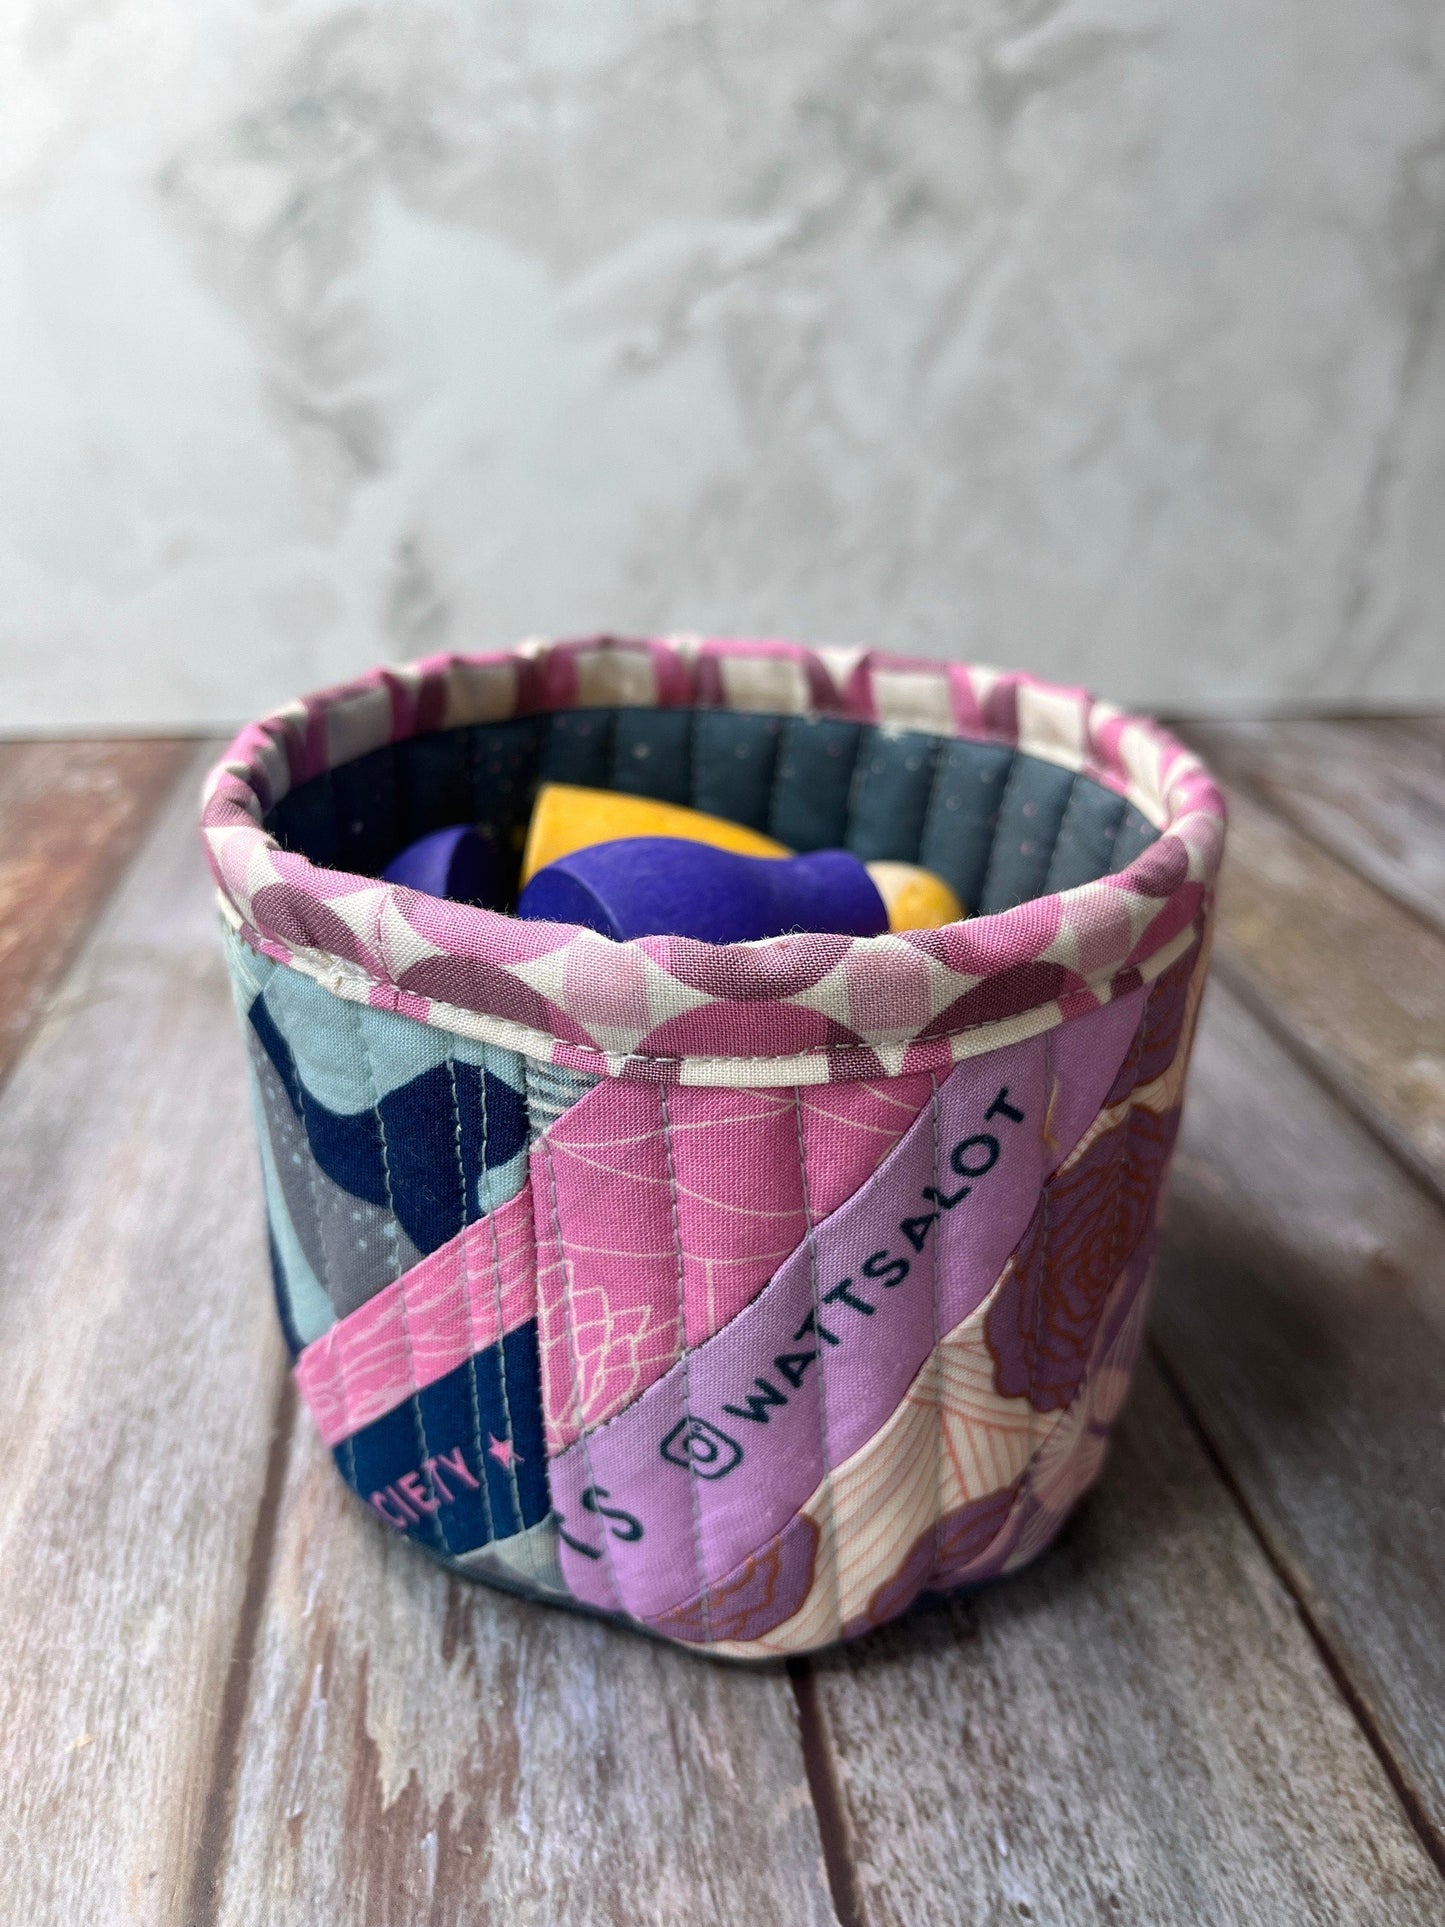 Small Fabric Tub Limited Edition No S202403 - Uphouse Crafts